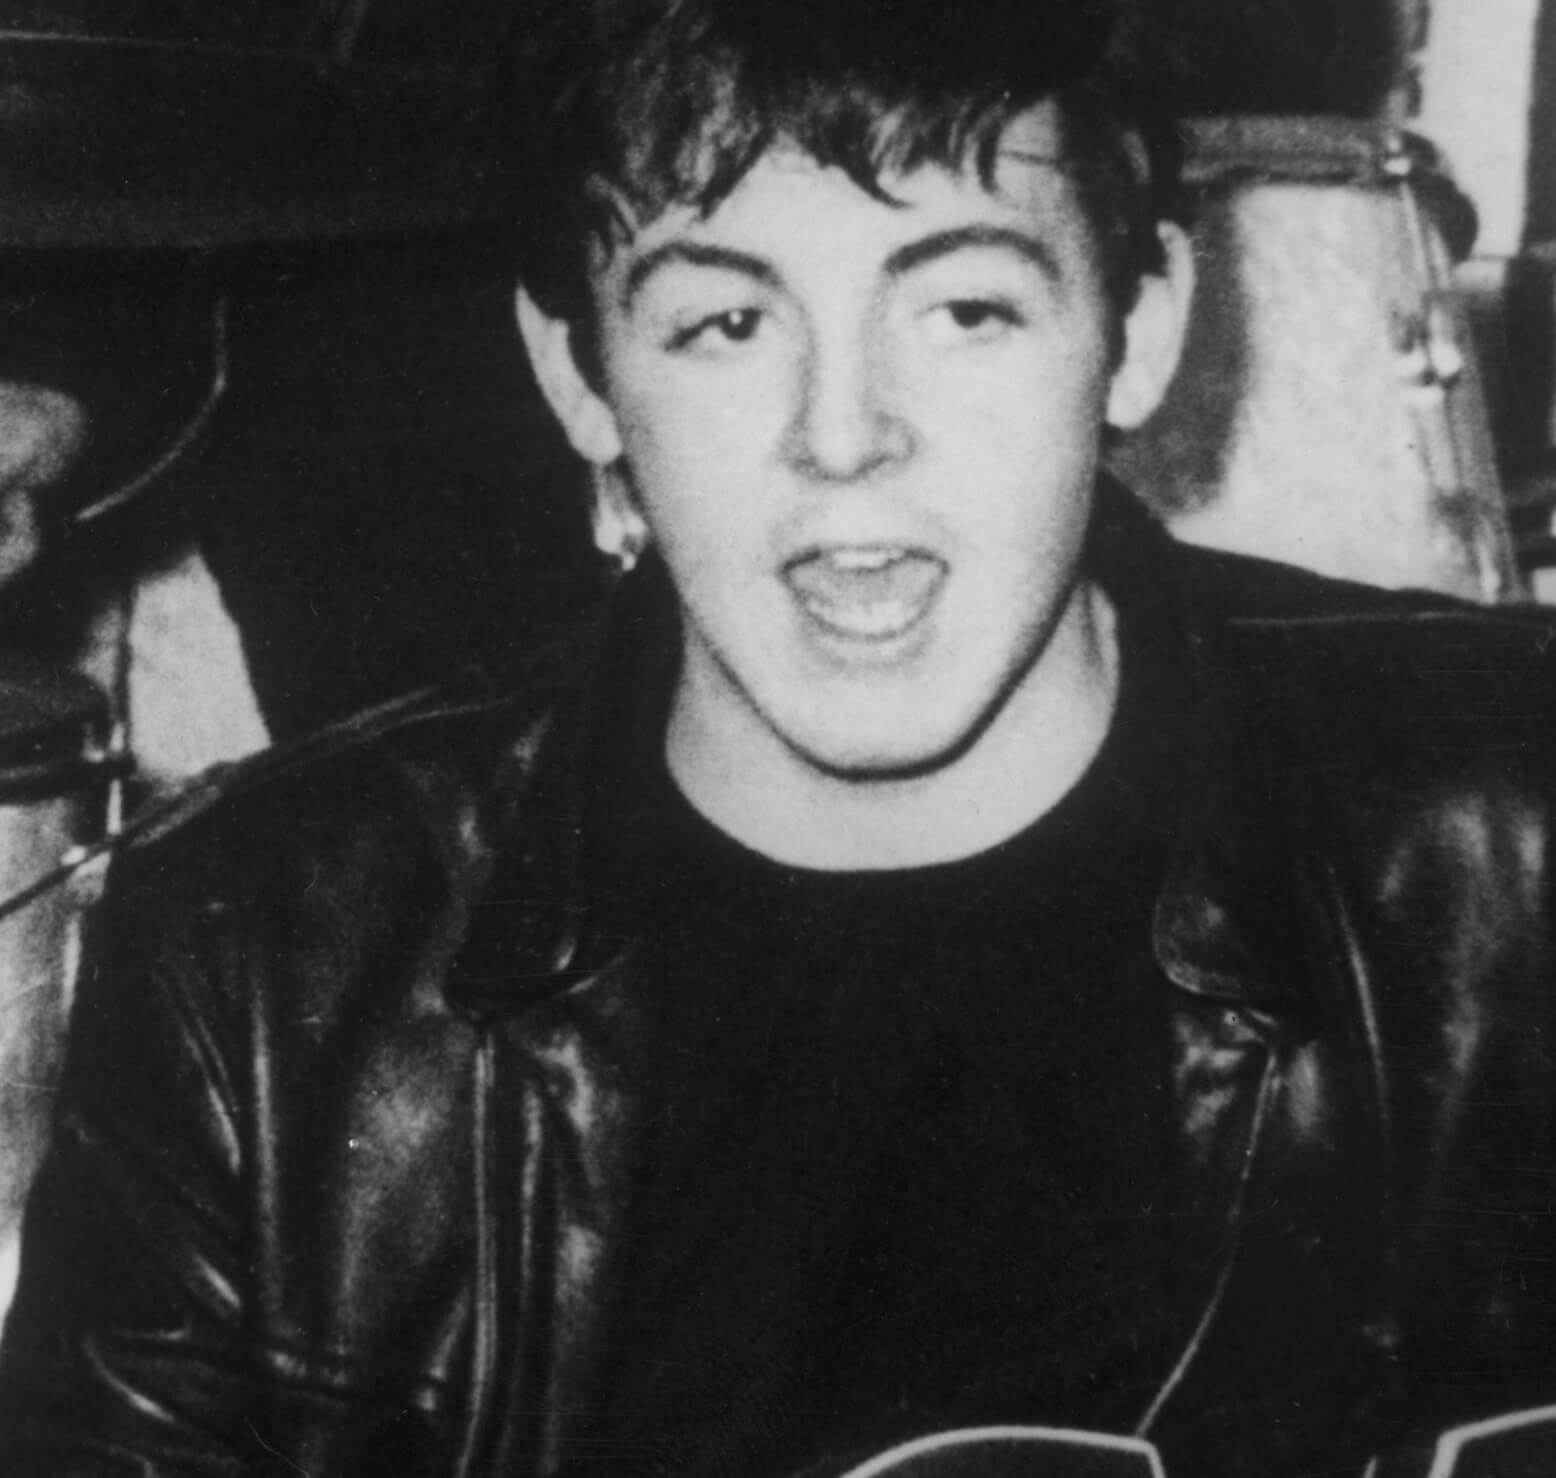 The Beatles' Paul McCartney in black-and-white